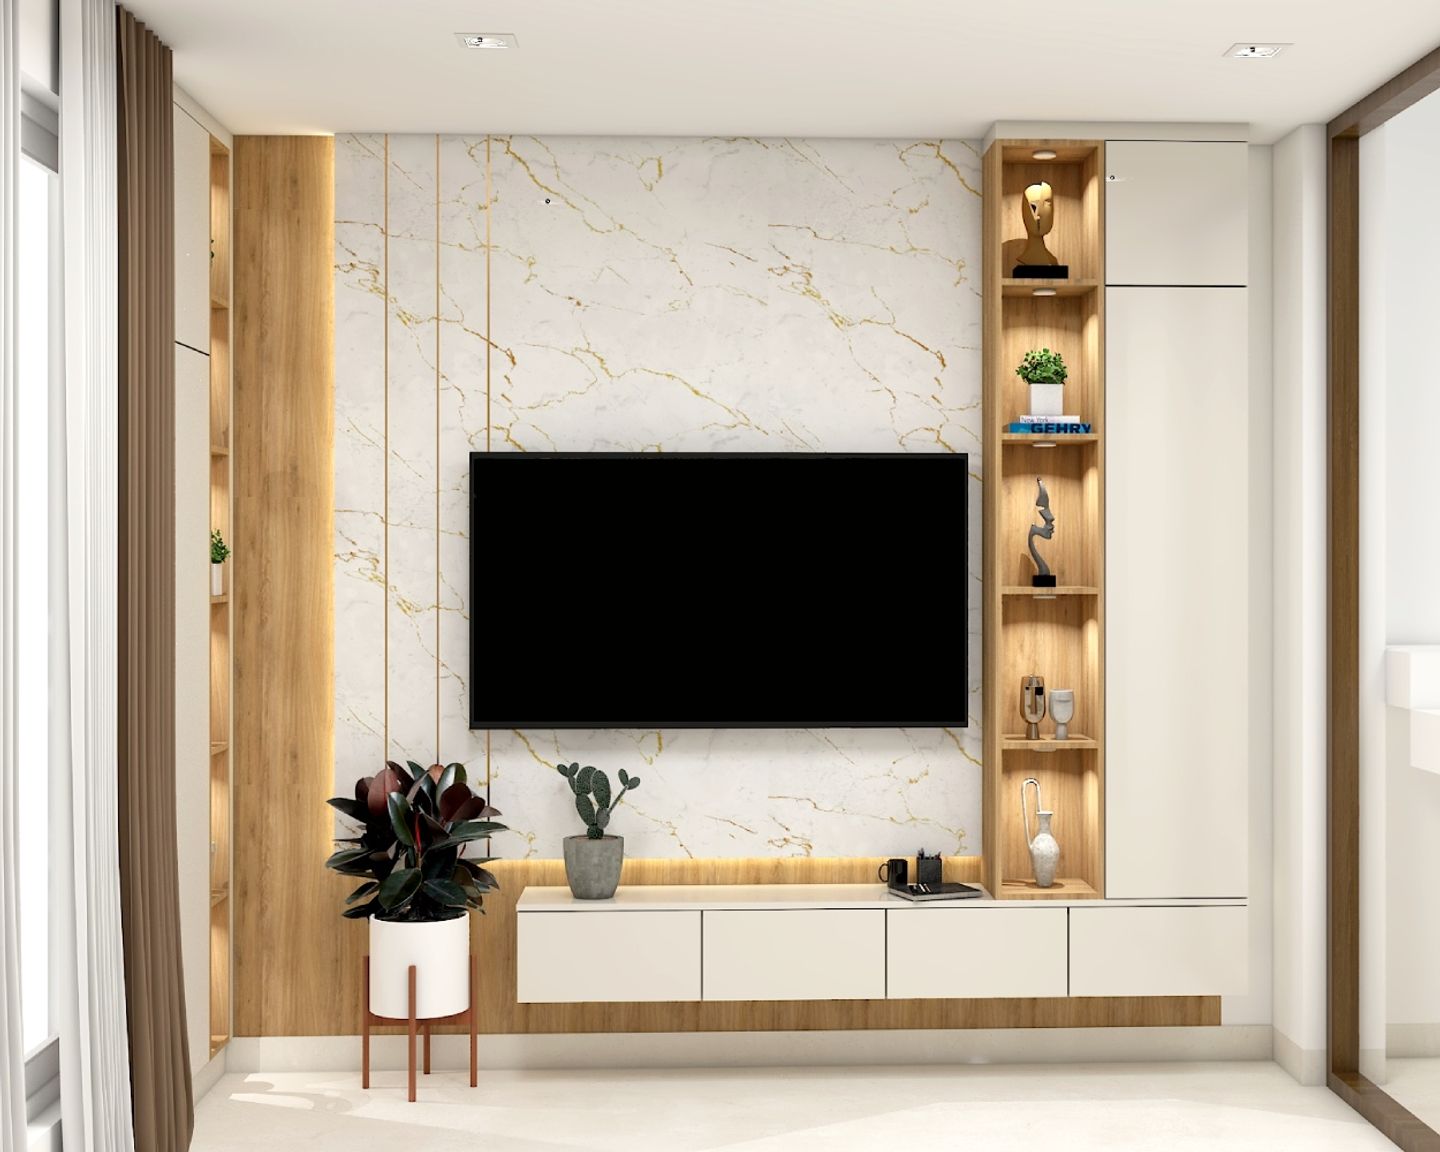 10x10 Ft Contemporary Frosty White TV Unit Design with Glossy Finish and Tahiti Samoa Teak Accents - Livspace